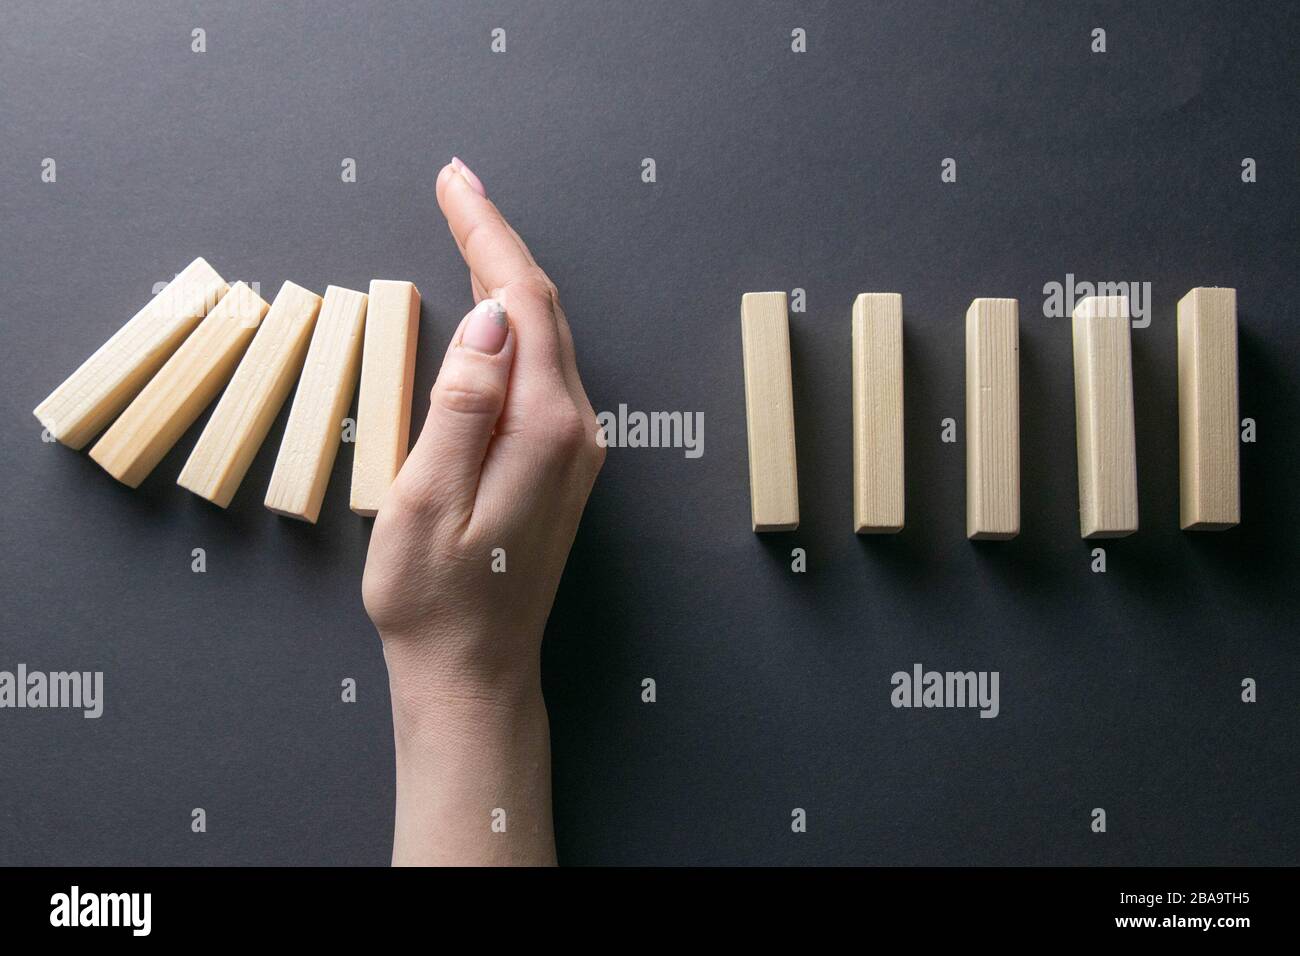 Top view whomen hand stopping falling dominos in a business crisis management conceptual image Stock Photo